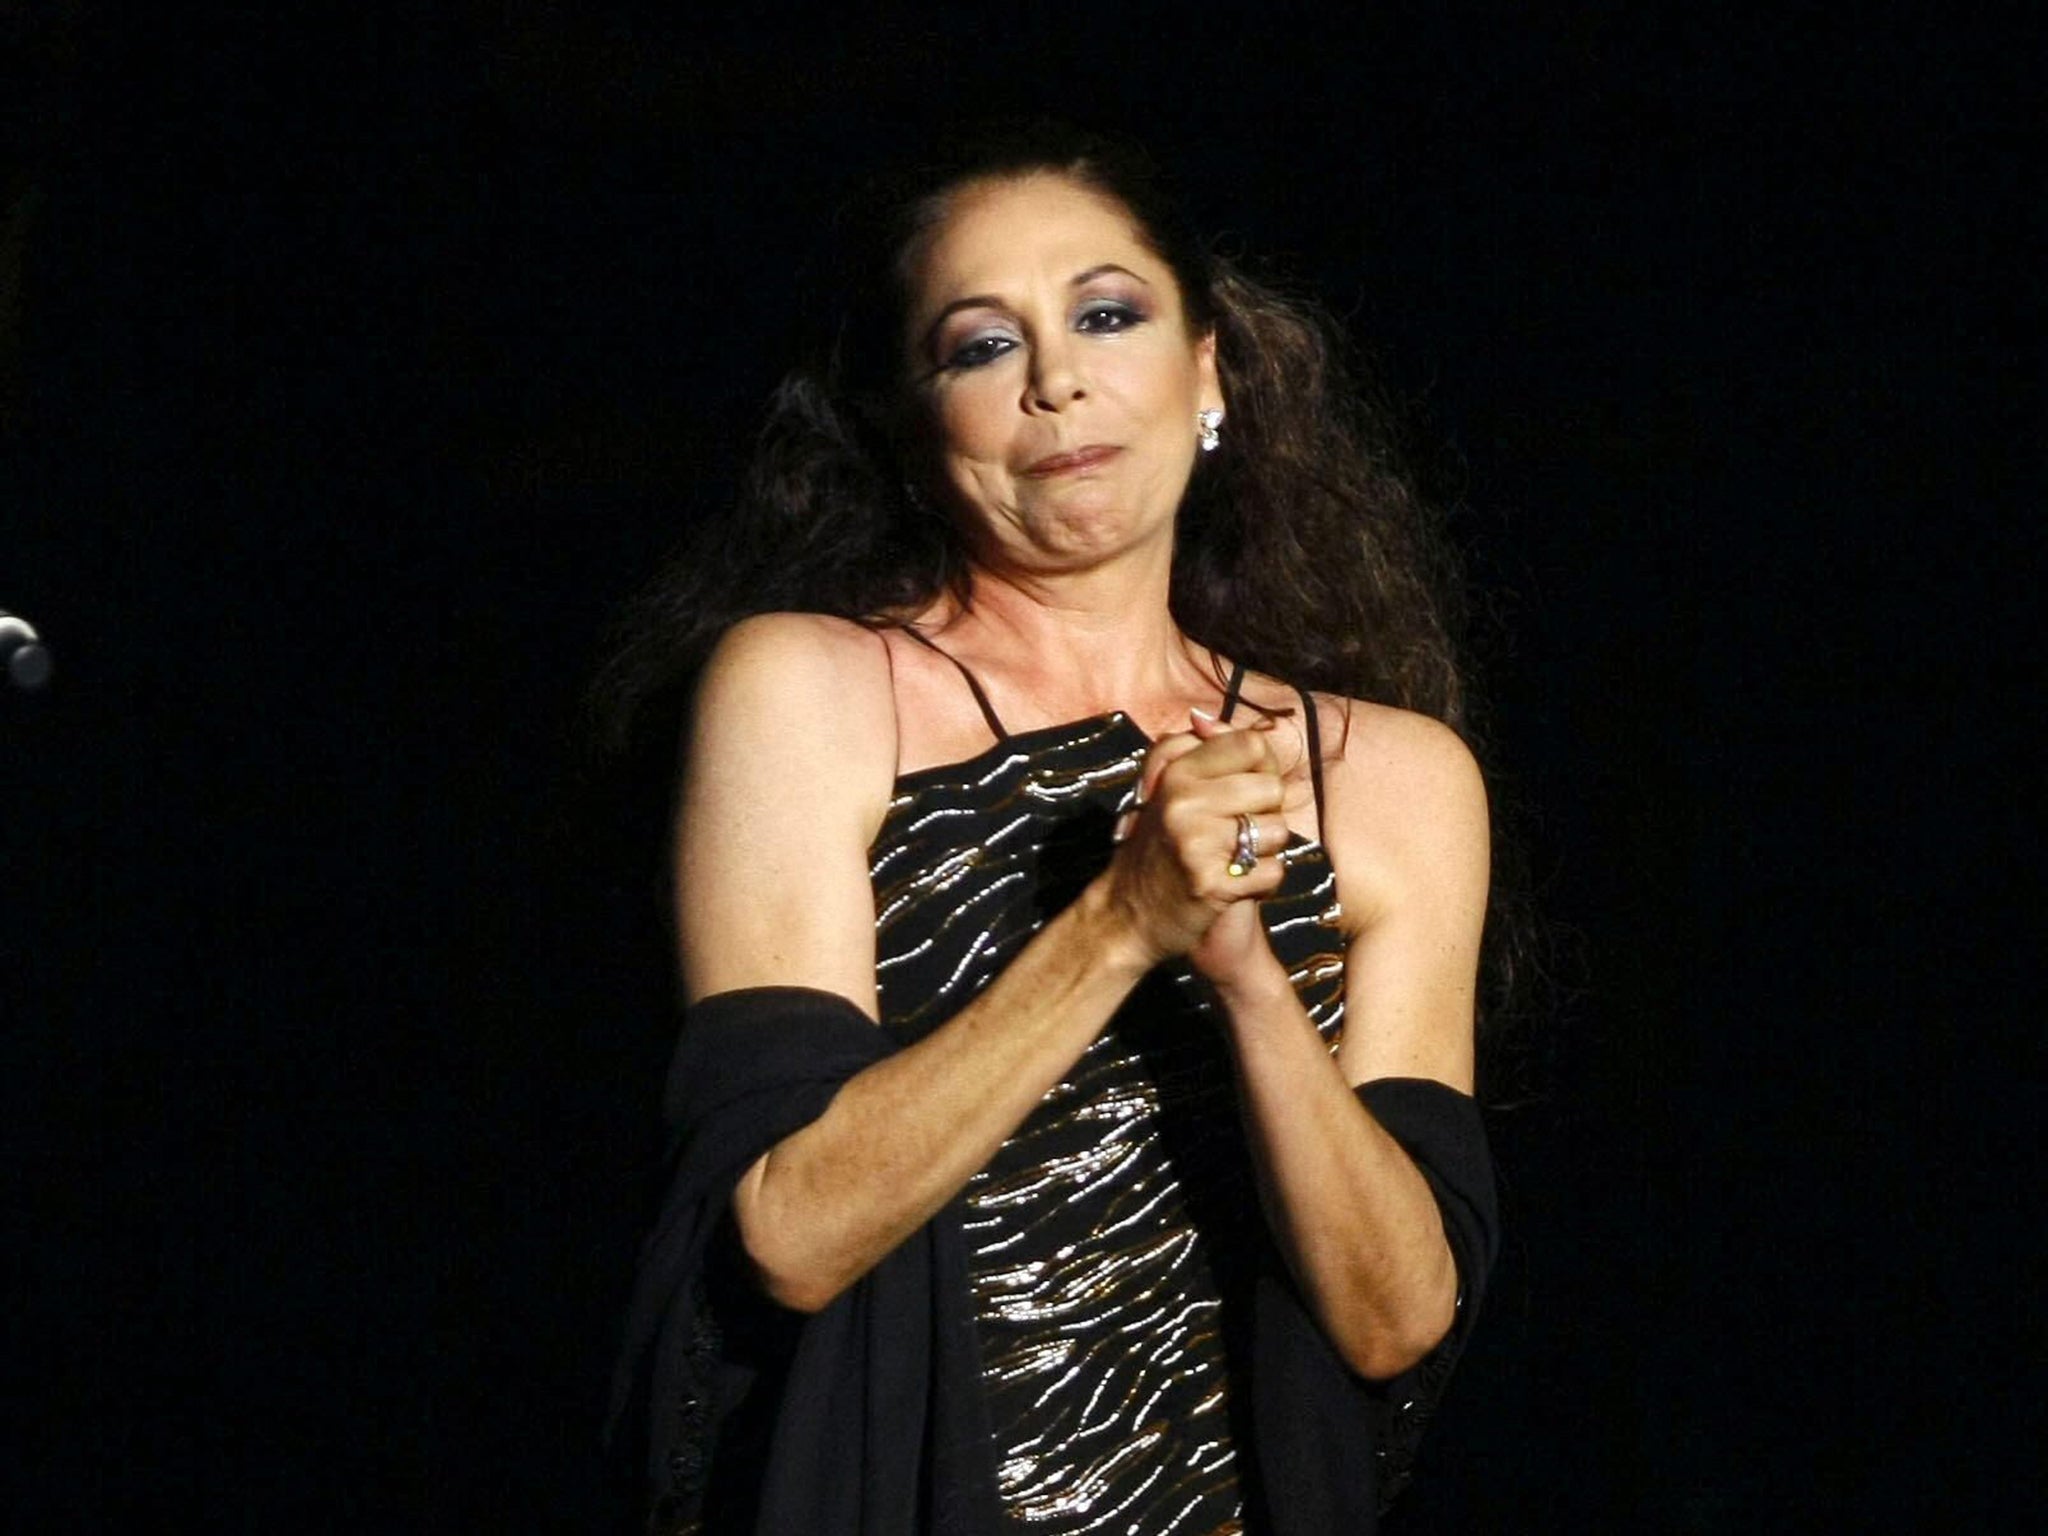 Isabel Pantoja on stage in 2013